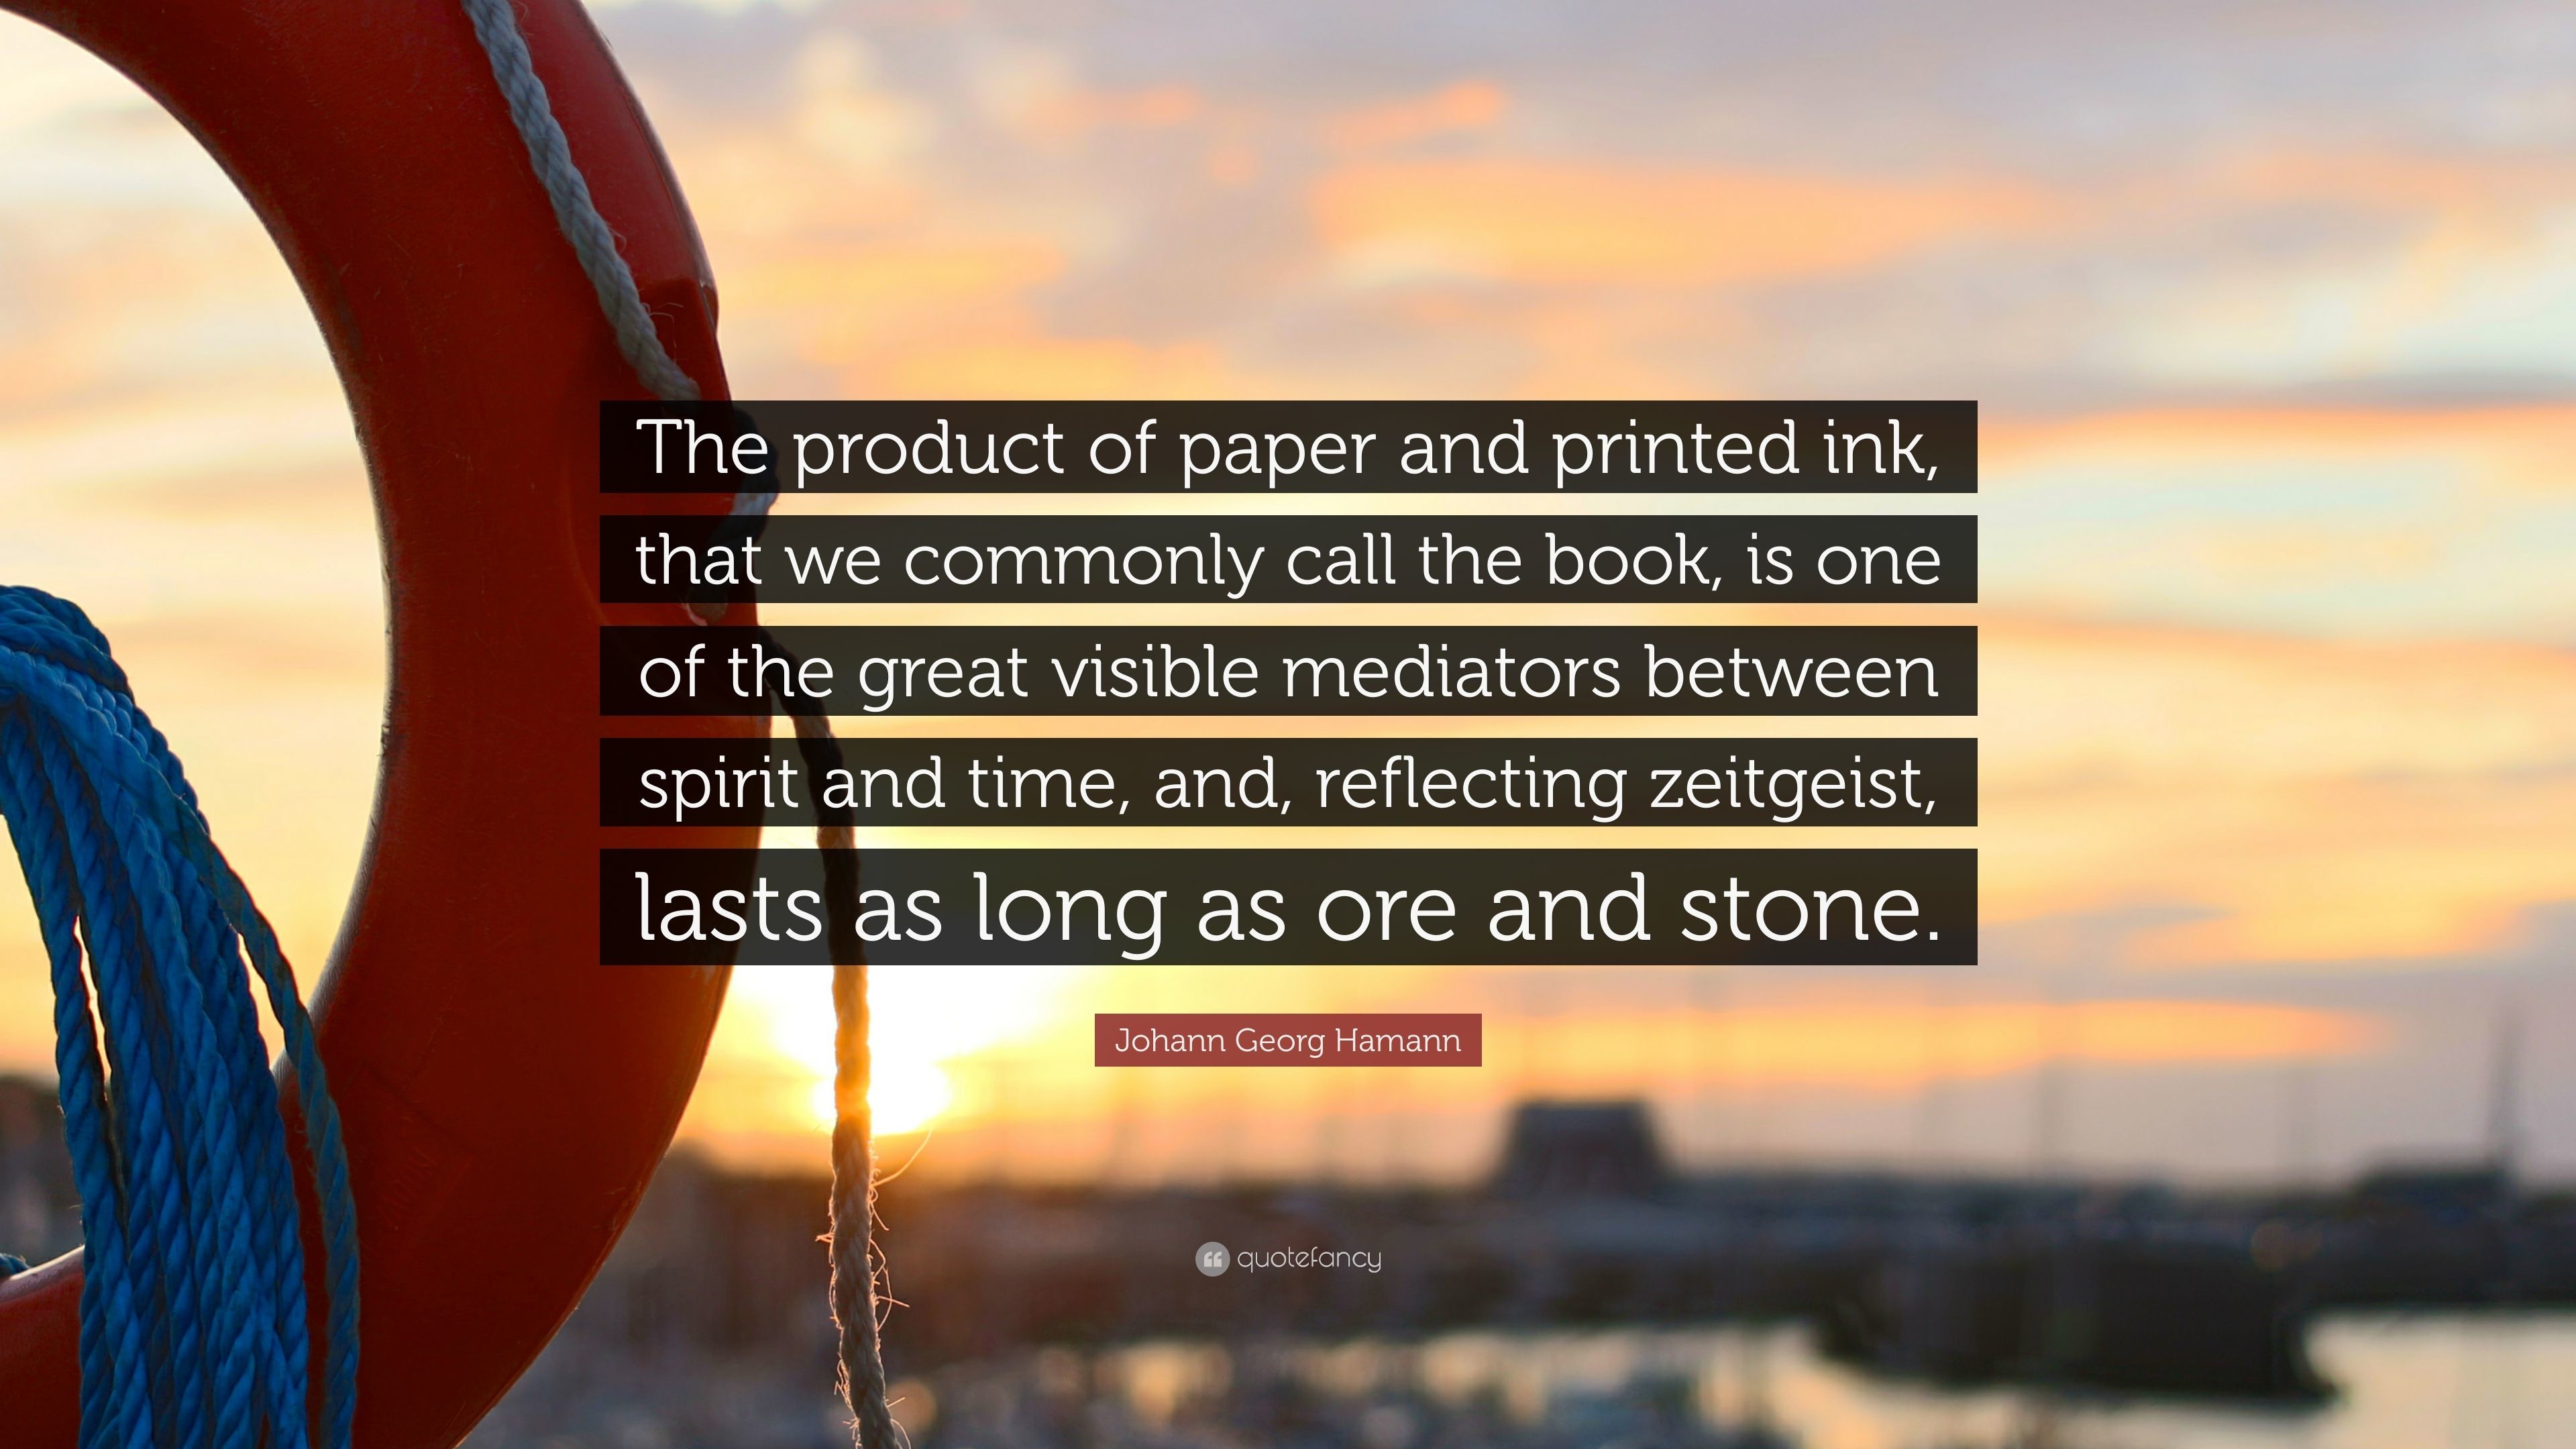 3840x2160 Johann Georg Hamann Quote: “The product of paper and printed ink, that we